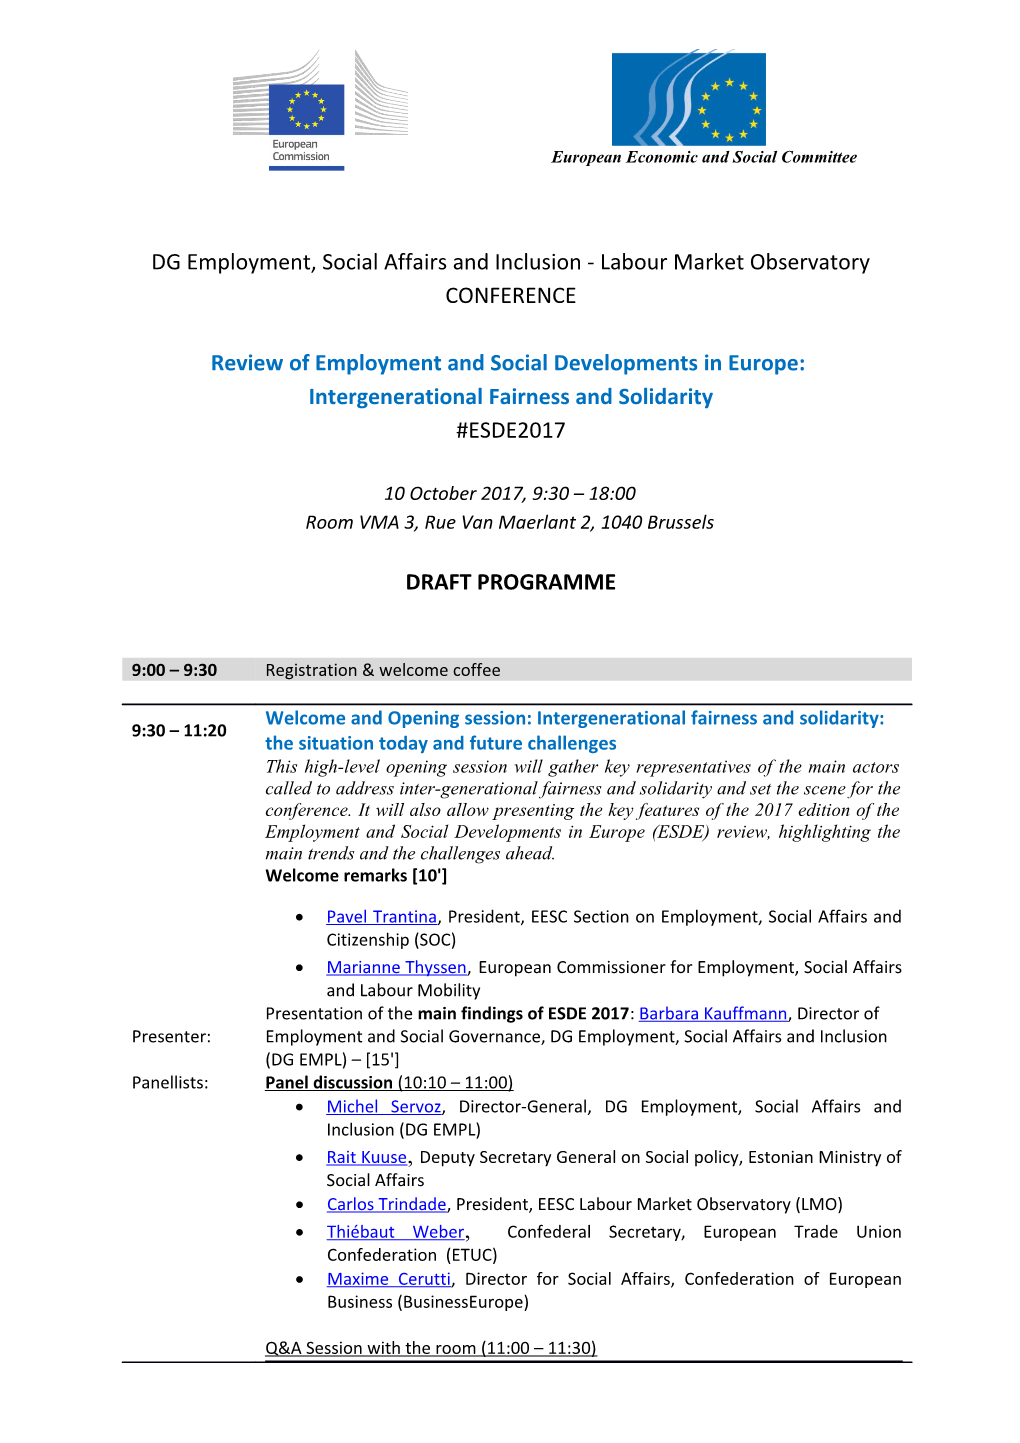 Review of Employment and Social Developments in Europe